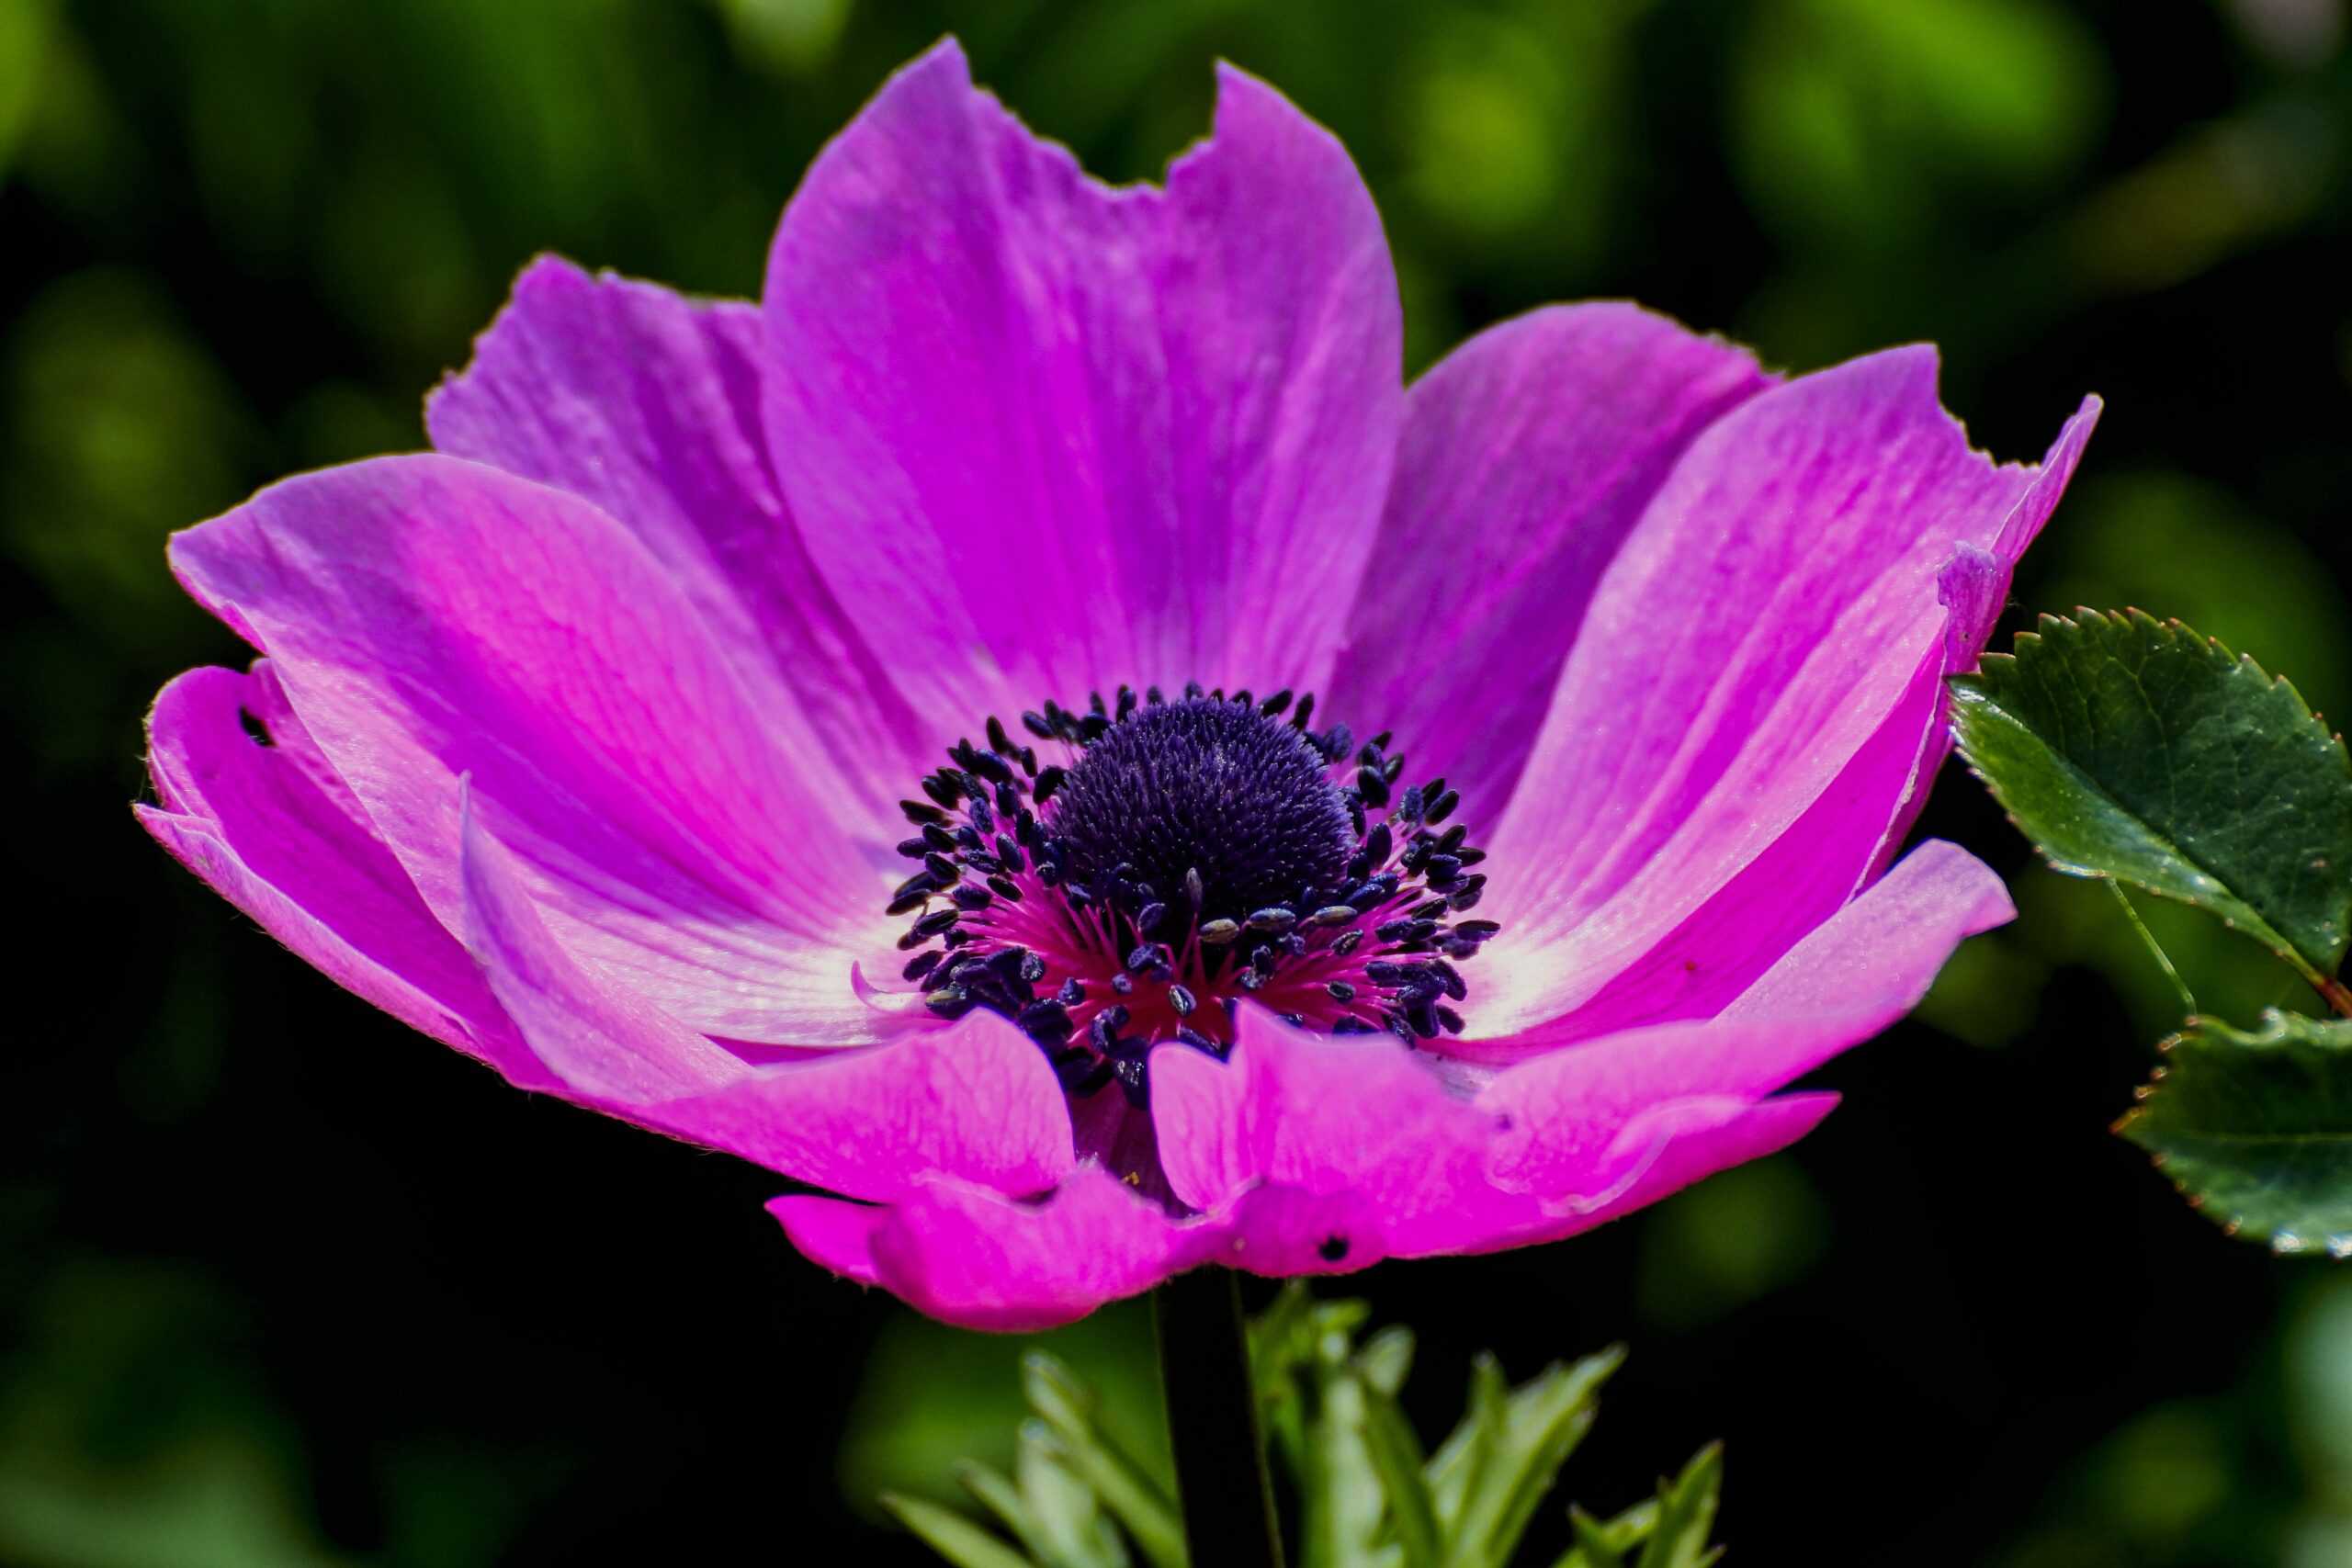 Anemone's meaning and symbolism